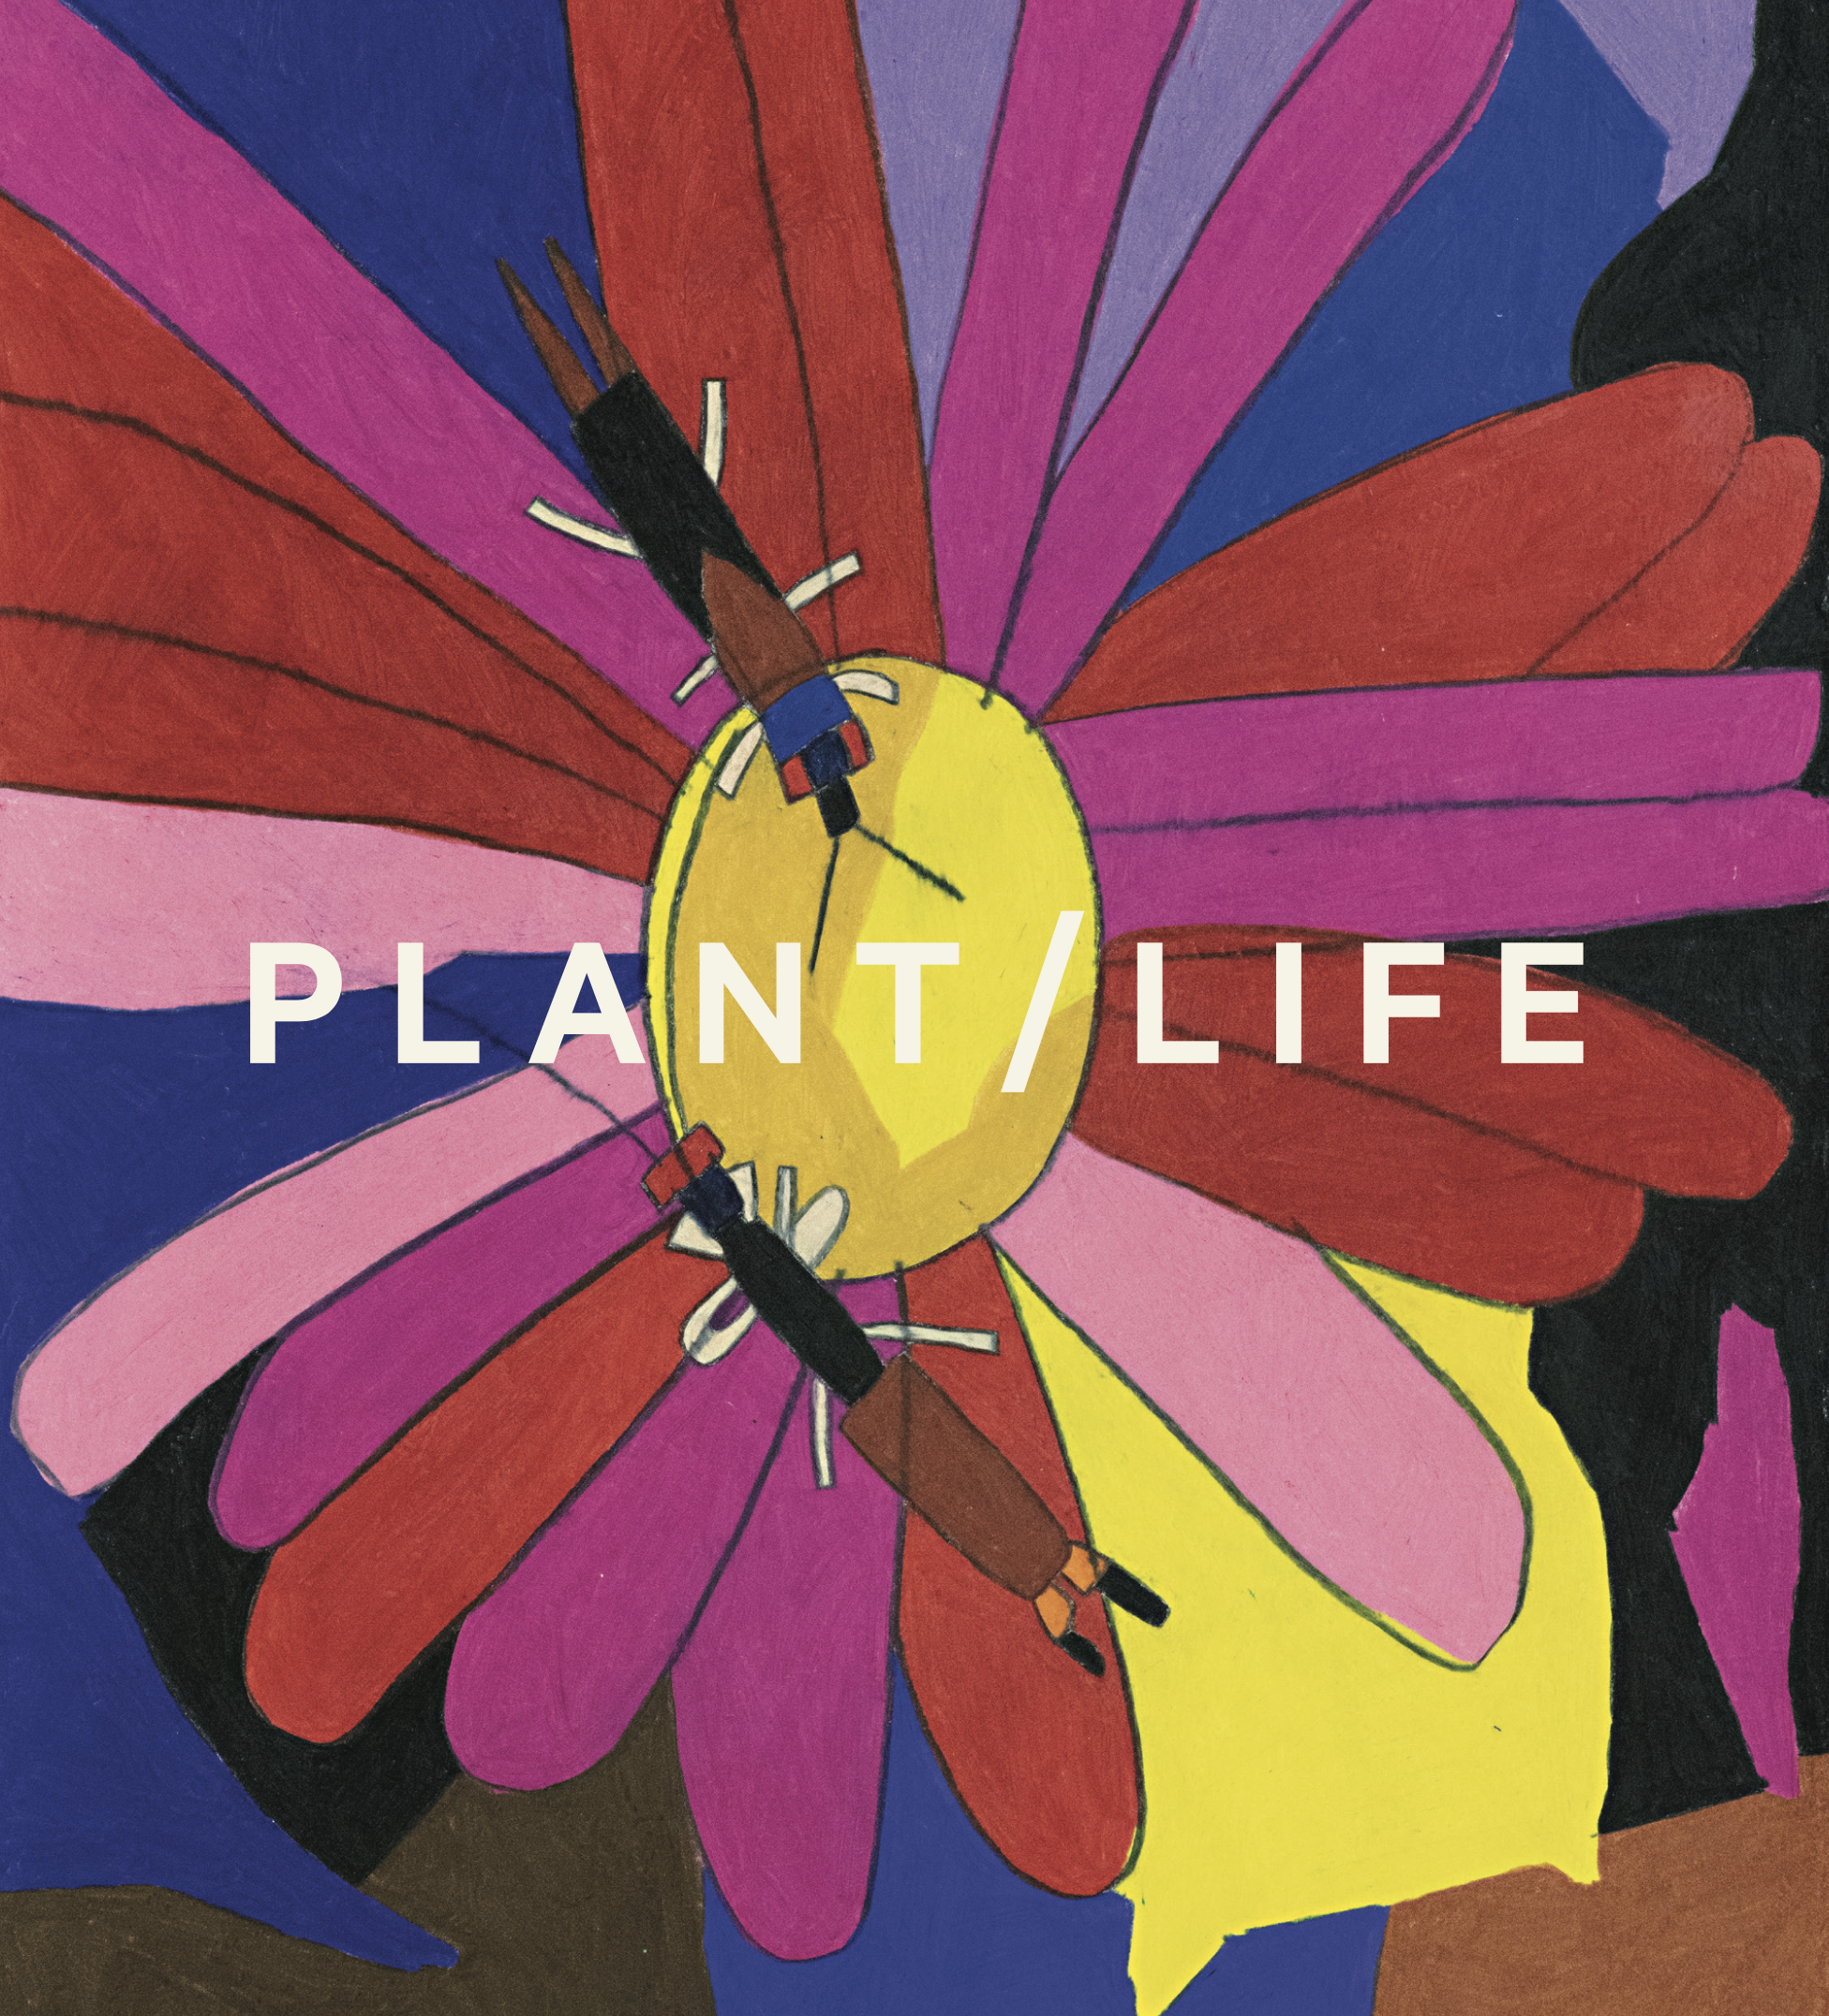 https://collingwoodyards.org/wp-content/uploads/2022/06/plant-life.png